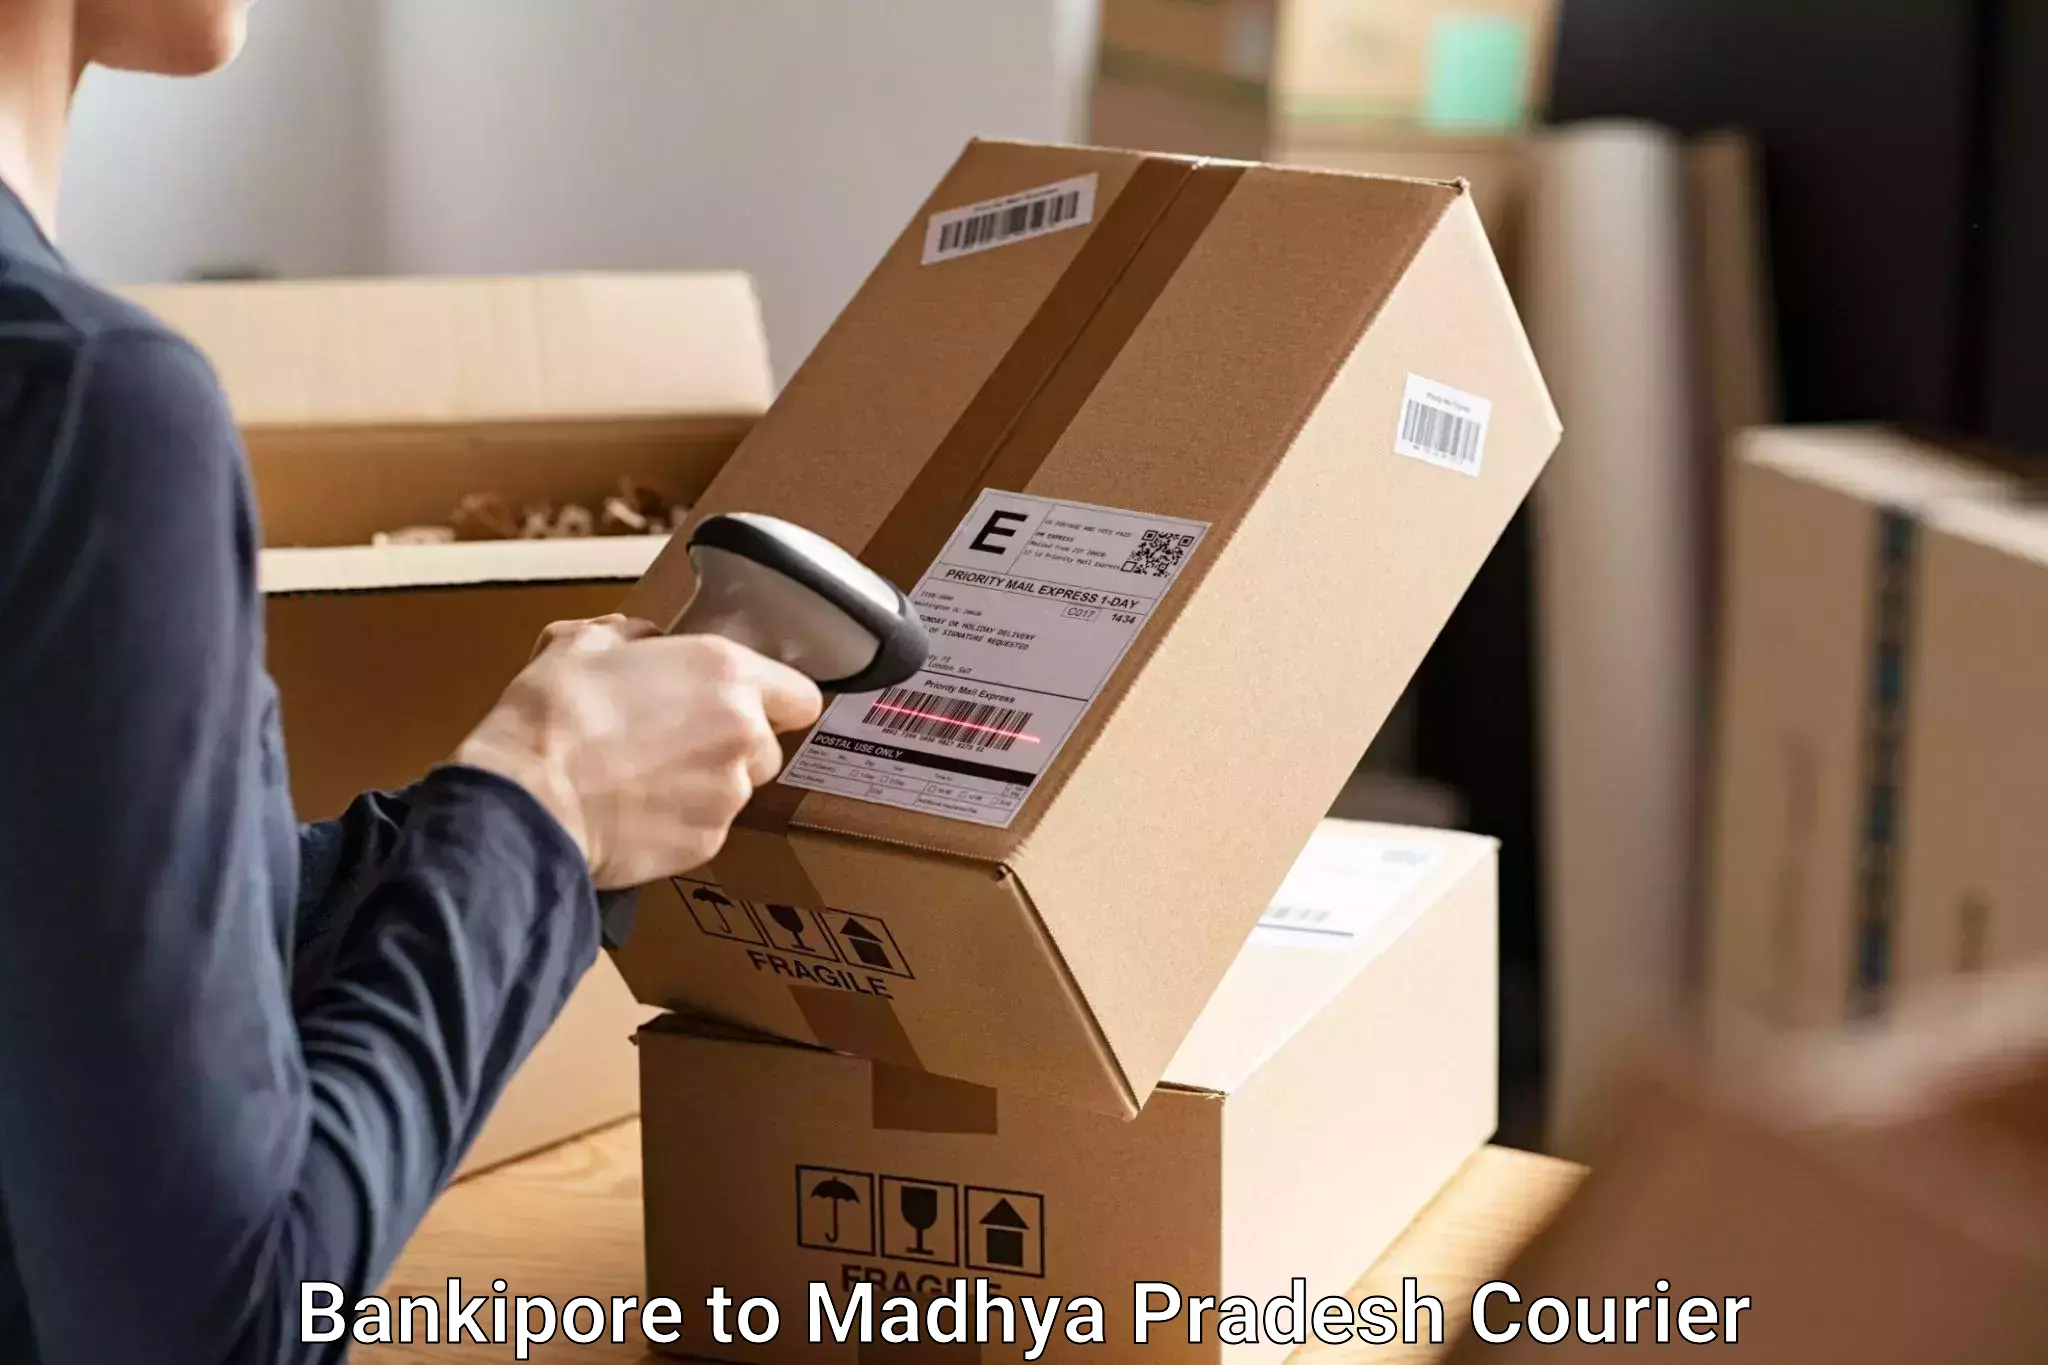 Personal effects shipping in Bankipore to Hoshangabad